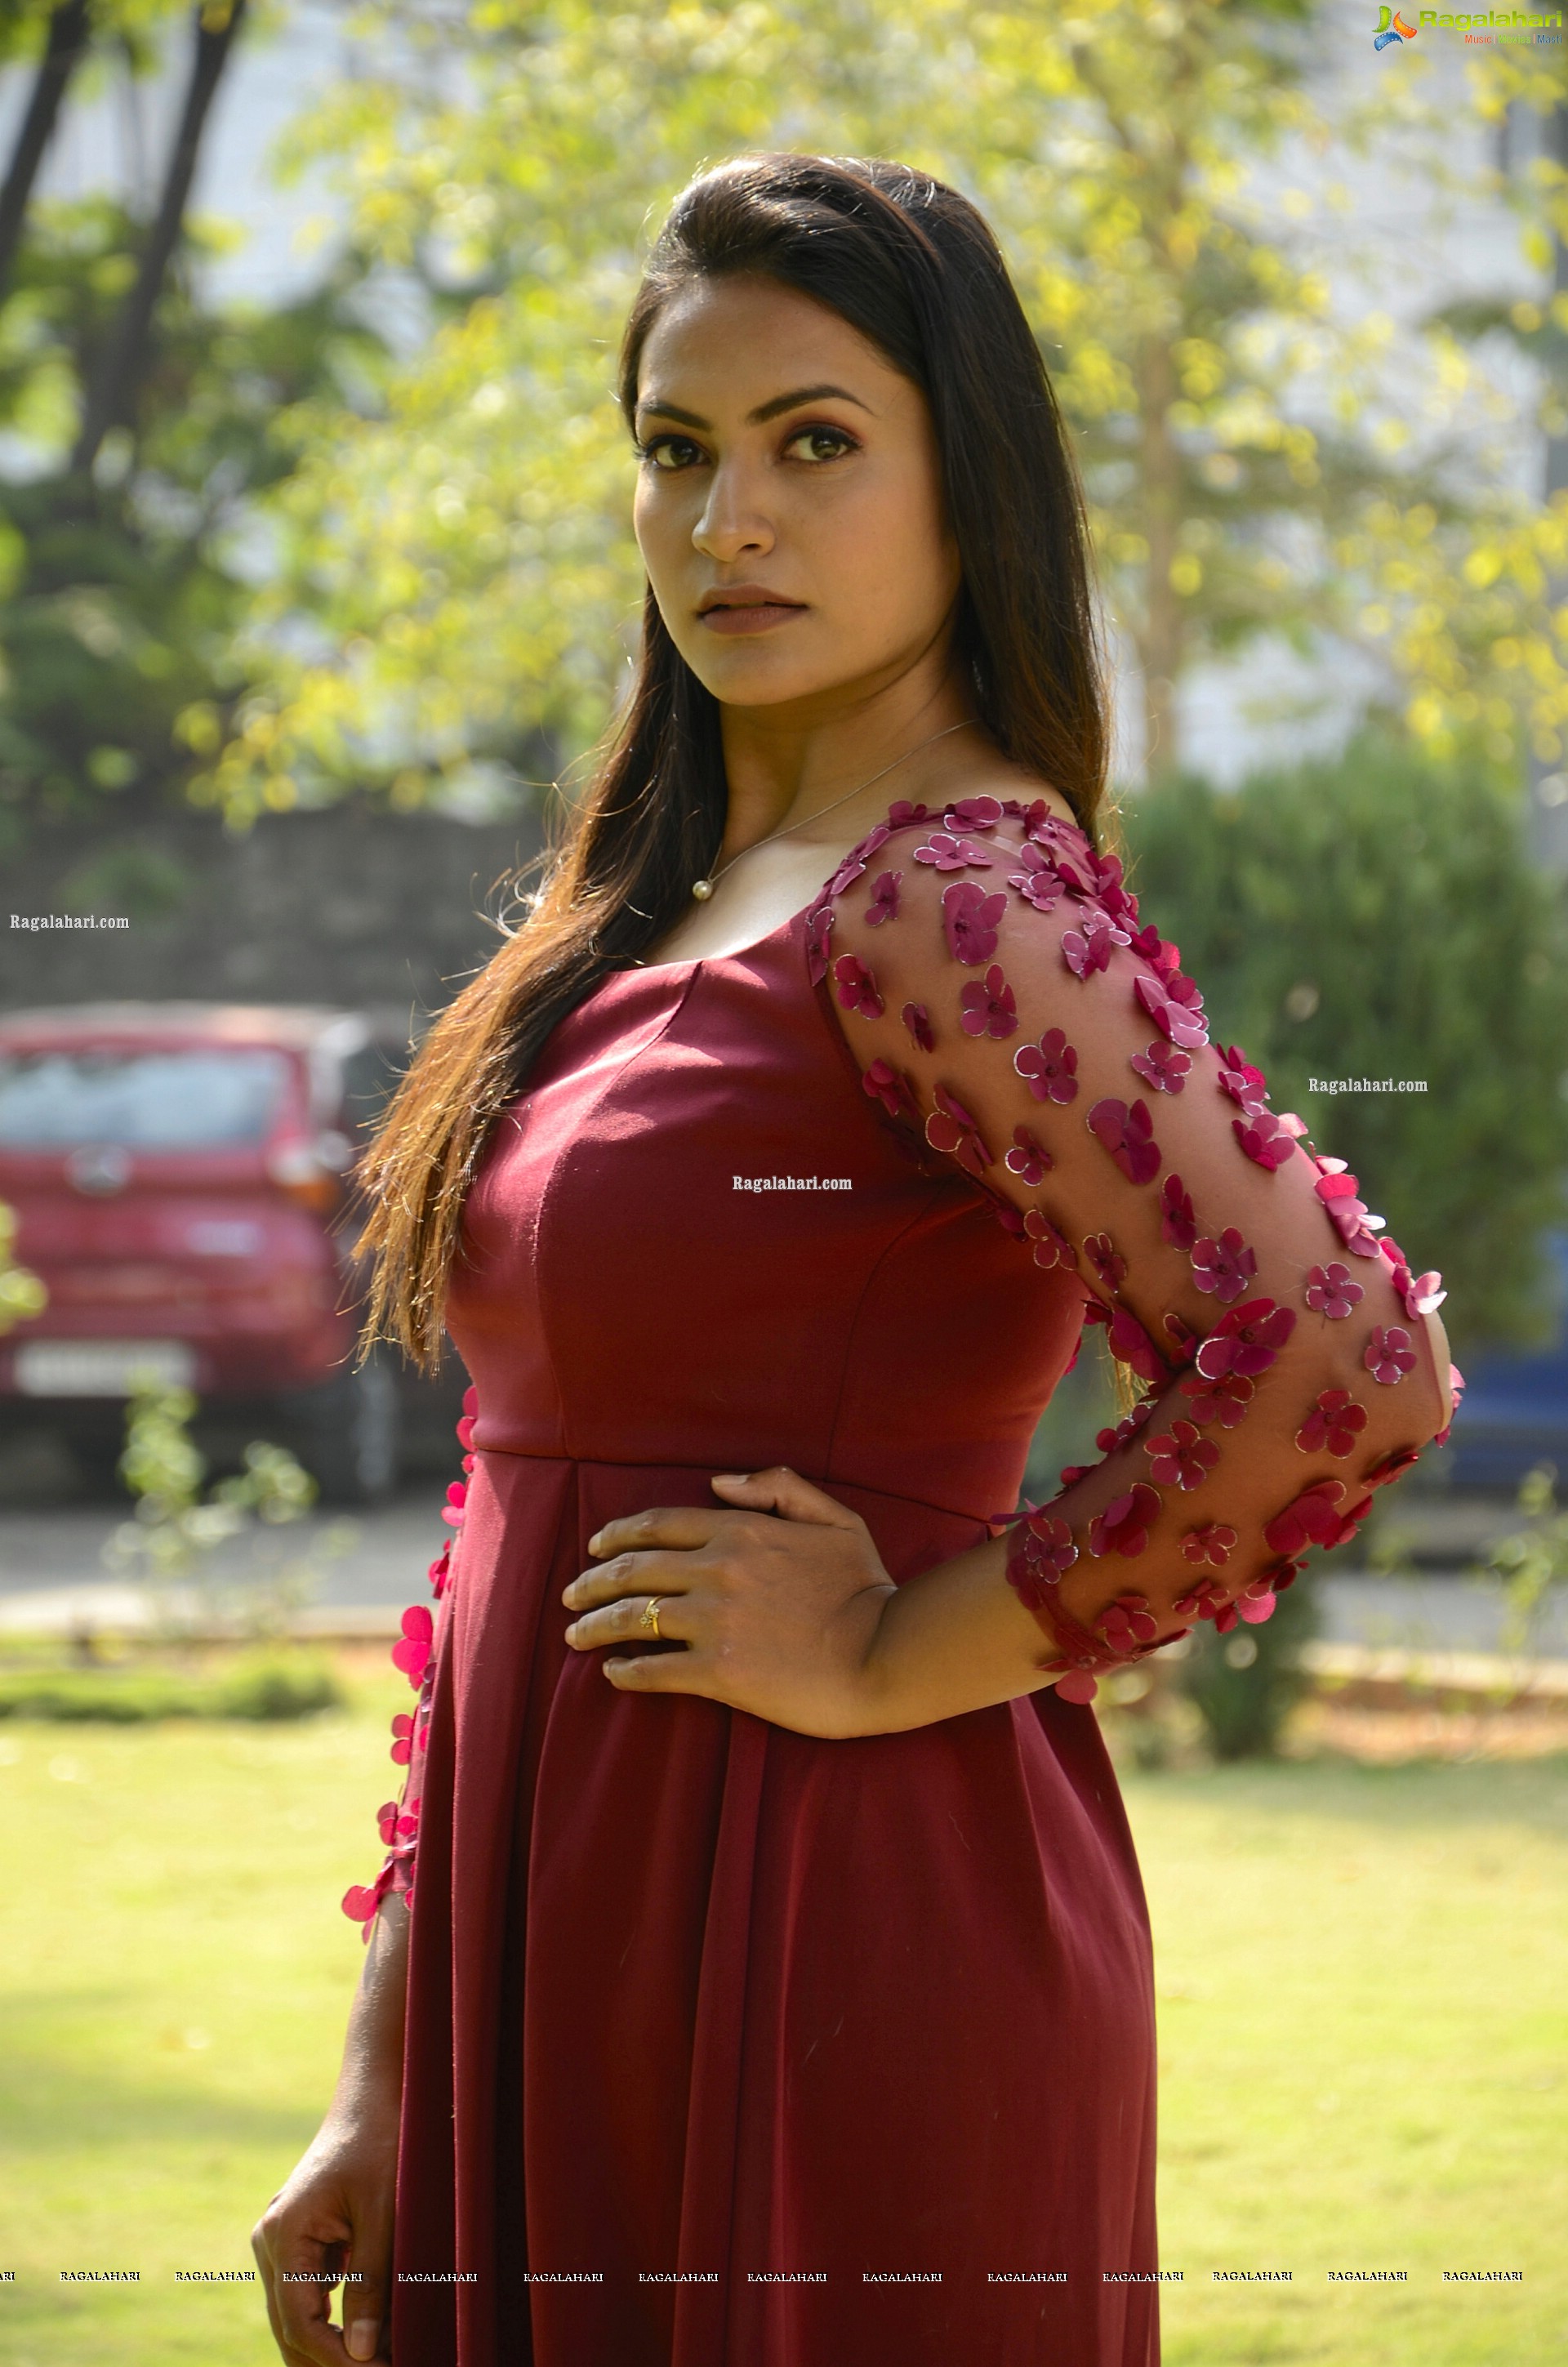 Swetaa Varma at MAD Movie Trailer Launch, HD Photo Gallery (Mark for Delete)